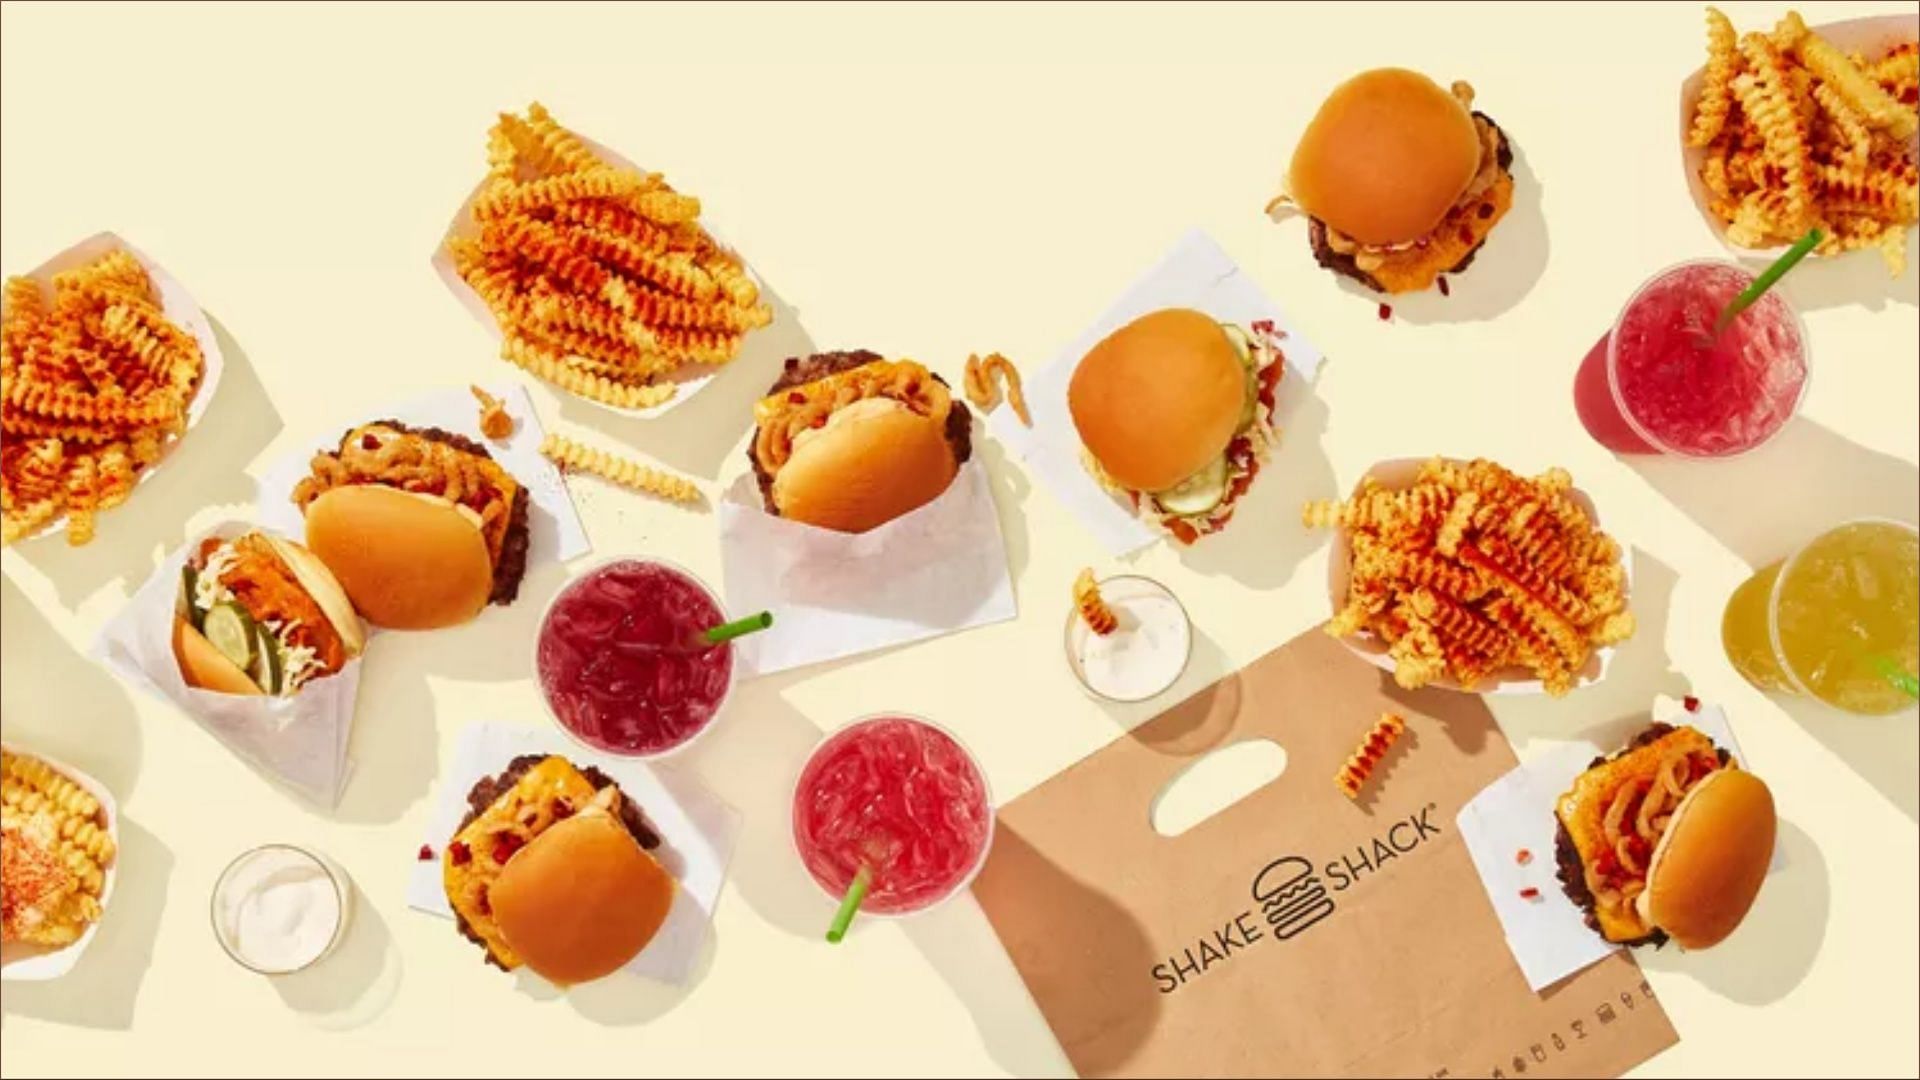 Fall gets extra spicy with the launch of three new offerings from the burger chain (Image via Shake Shack)